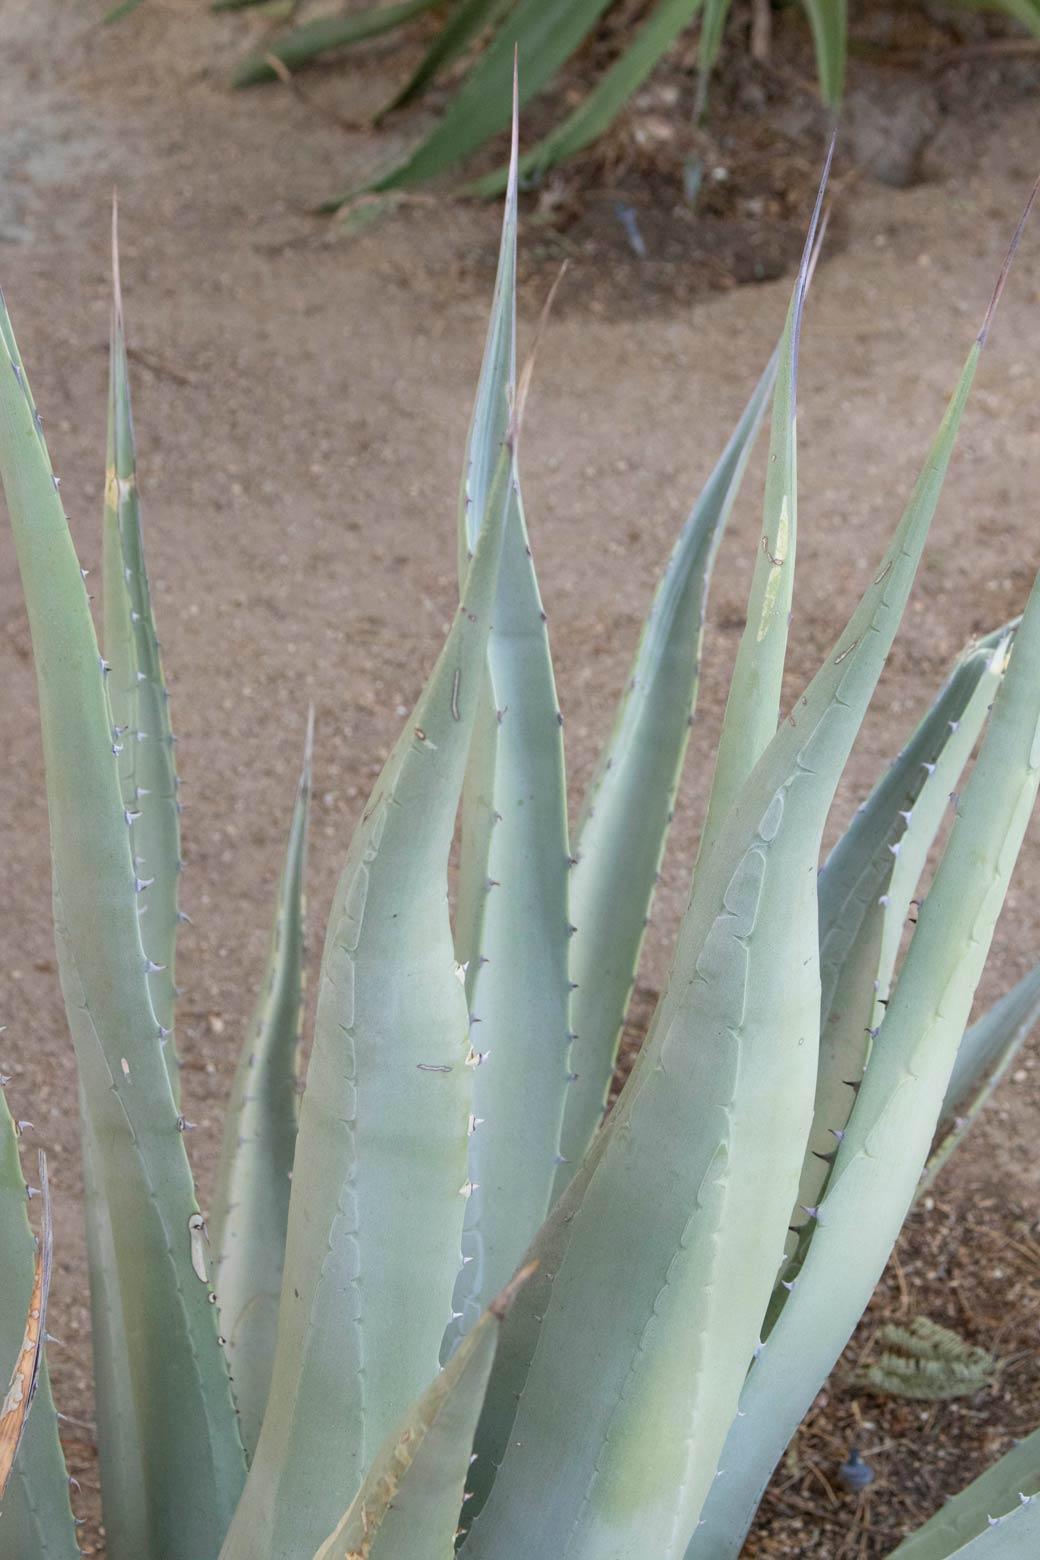 A close-up of the leaves of Desert Agave.